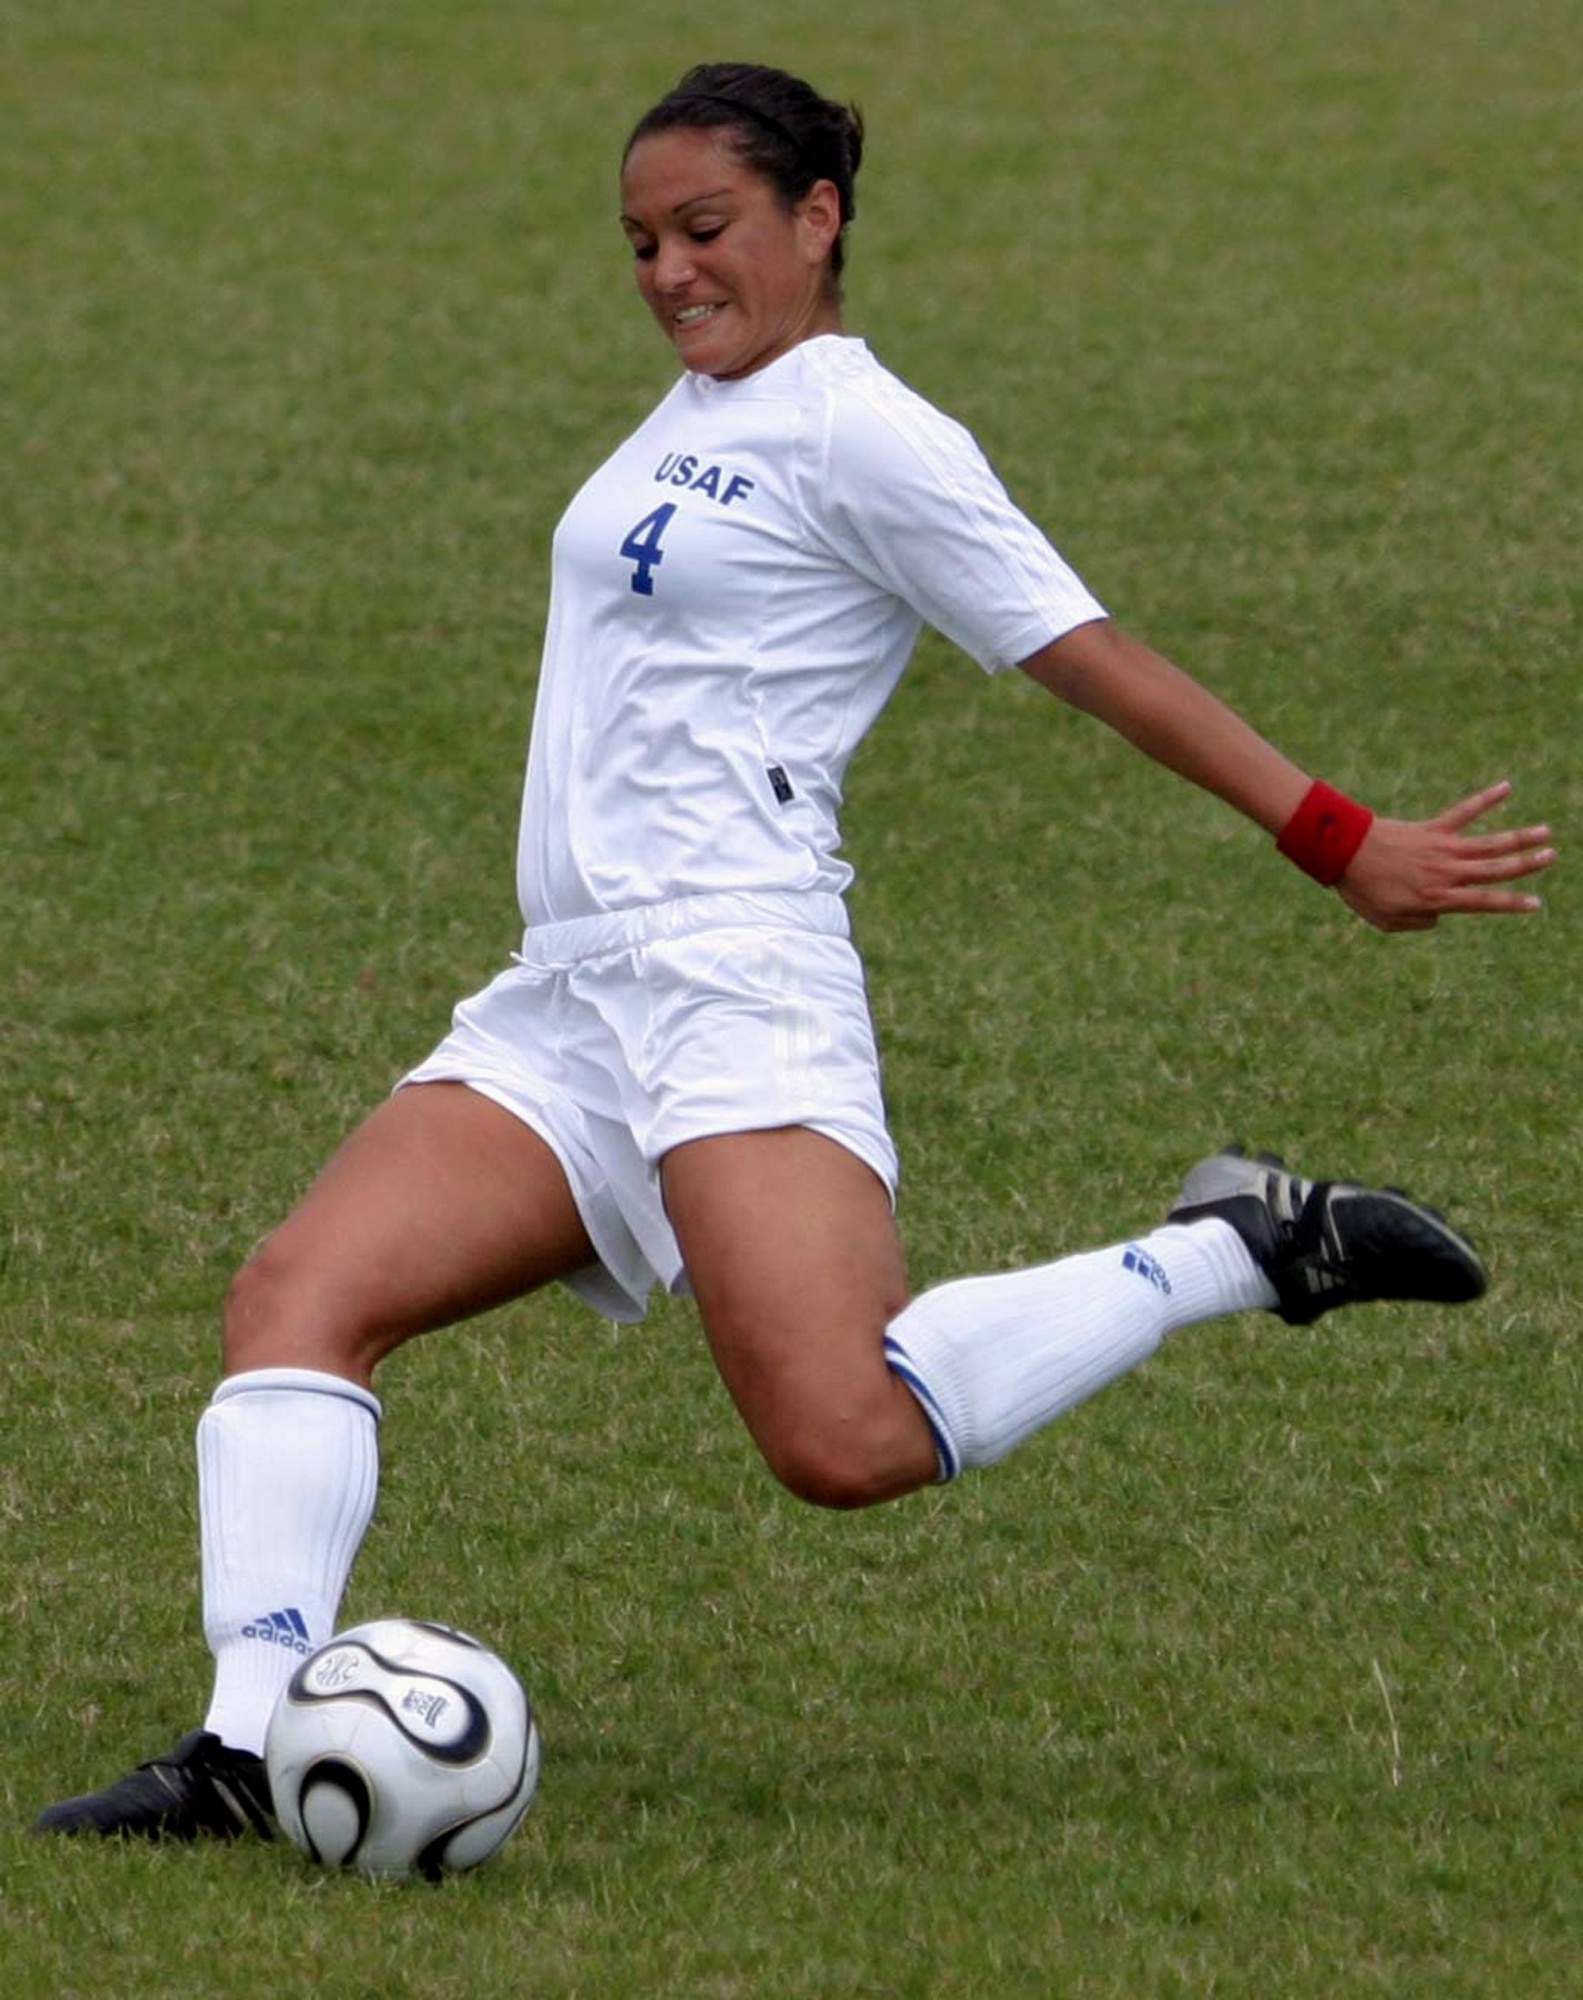 Nicole Burnside was on the Air Force women's soccer team that won the 2006 armed forces women's soccer championship at Naval Station Mayport, Fla. She was also selected to the all-tournament team.  She is stationed at Travis Air Force Base, Calif. (U.S. Air Force photo)
